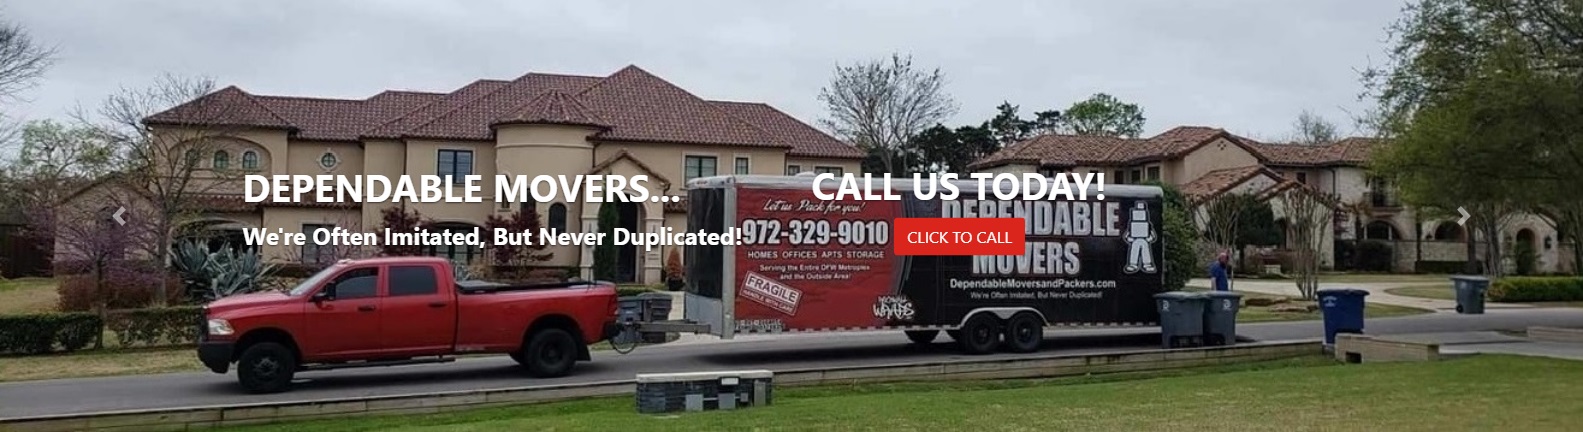 Dependable Movers Coppell Mover Coppell Moving Company - Home Office Apartment Movers Residential Commercial Movers in Coppell Texas